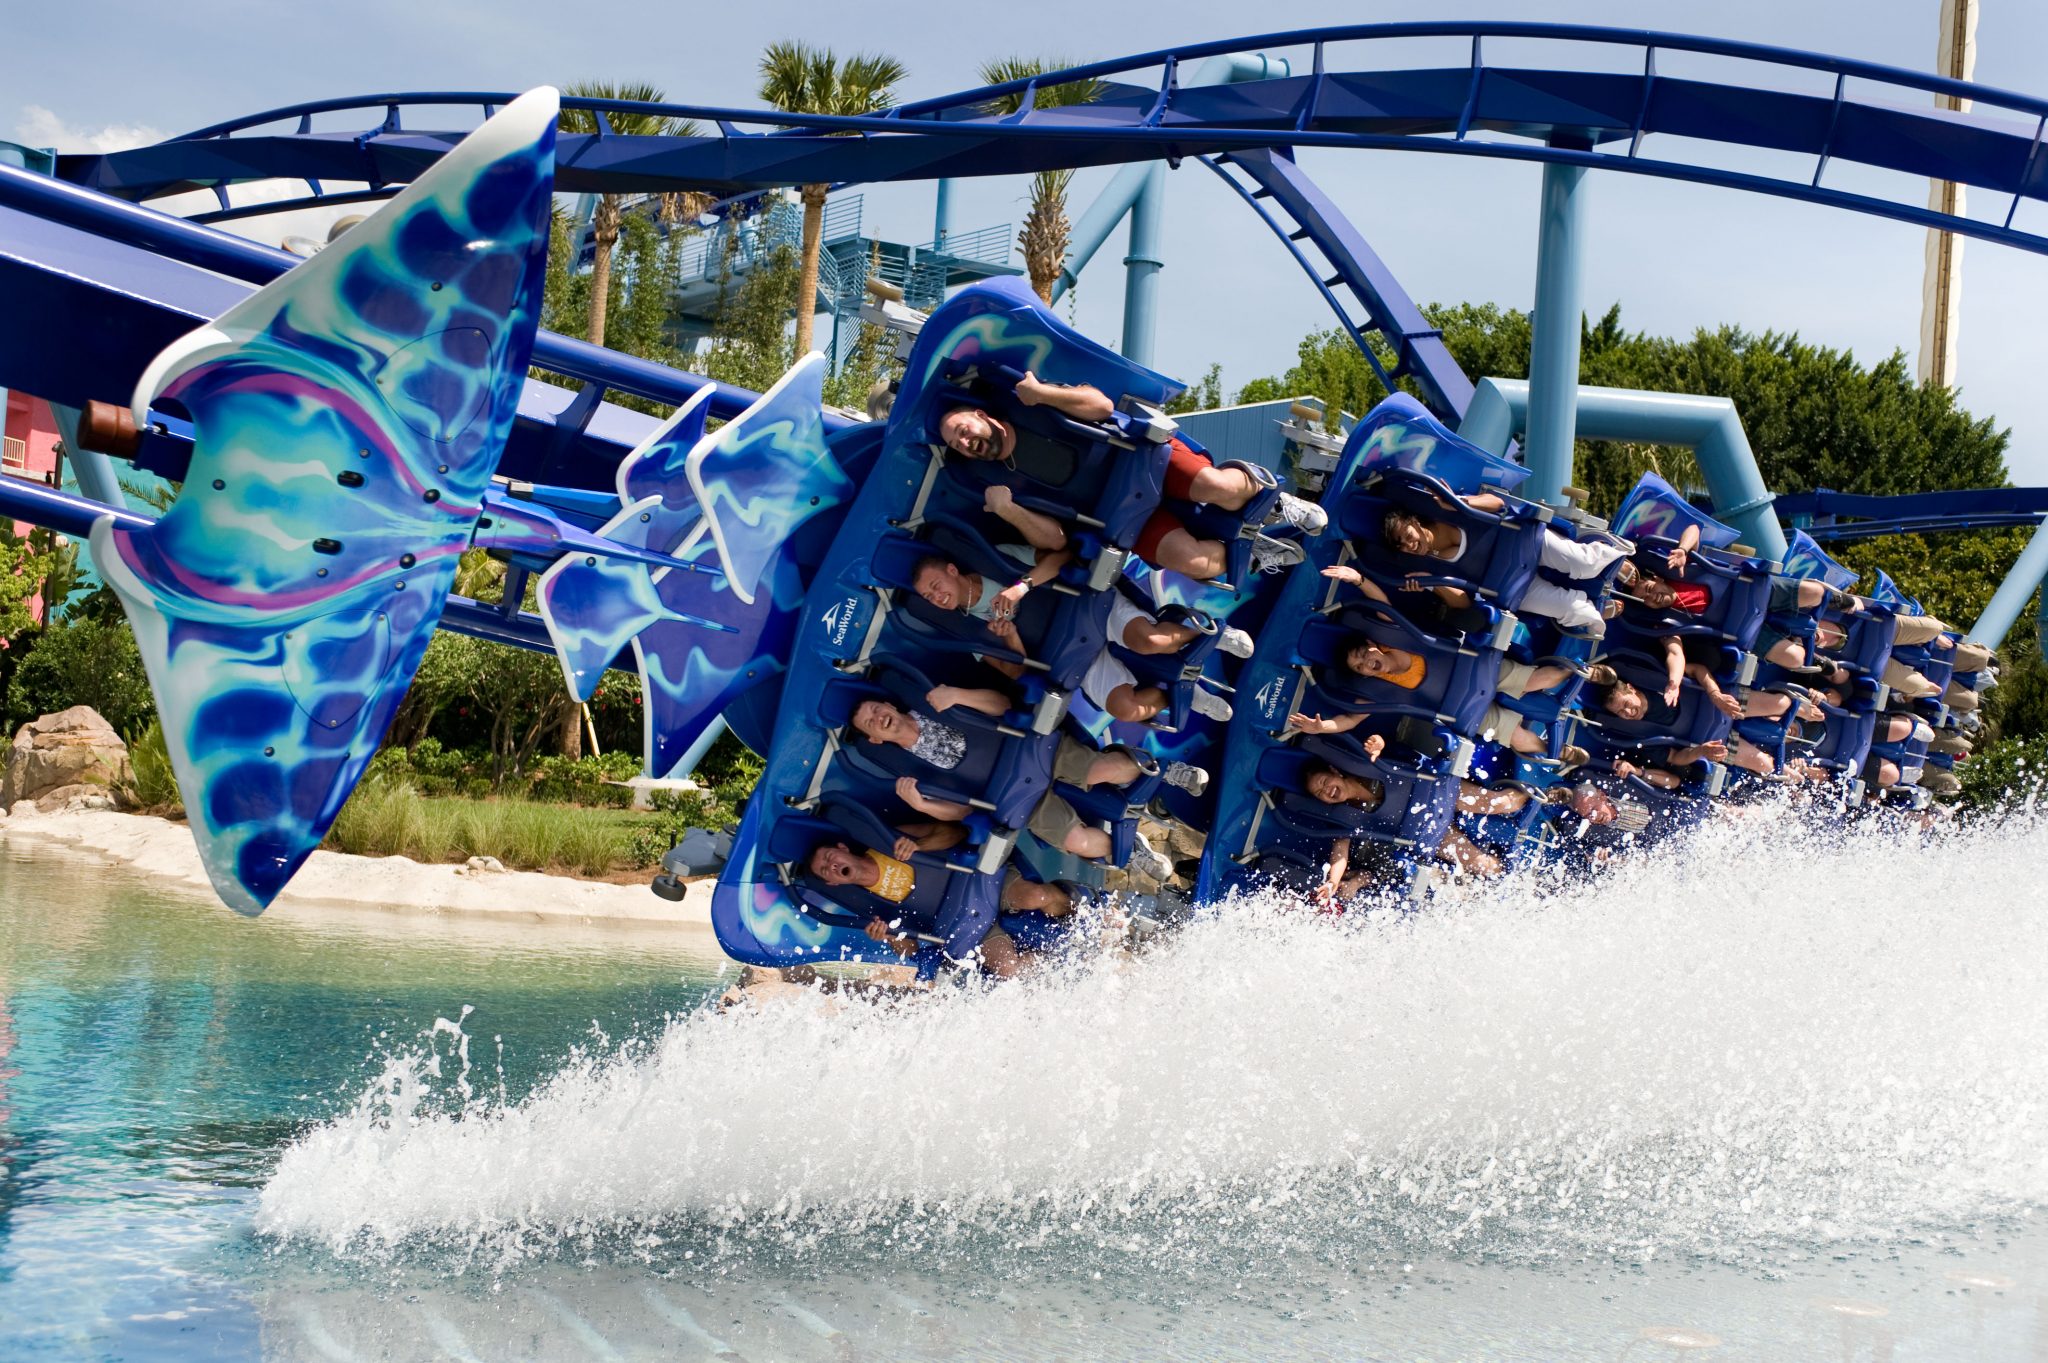 Sea World Orlando Vacation Packages - The Park Prodigy